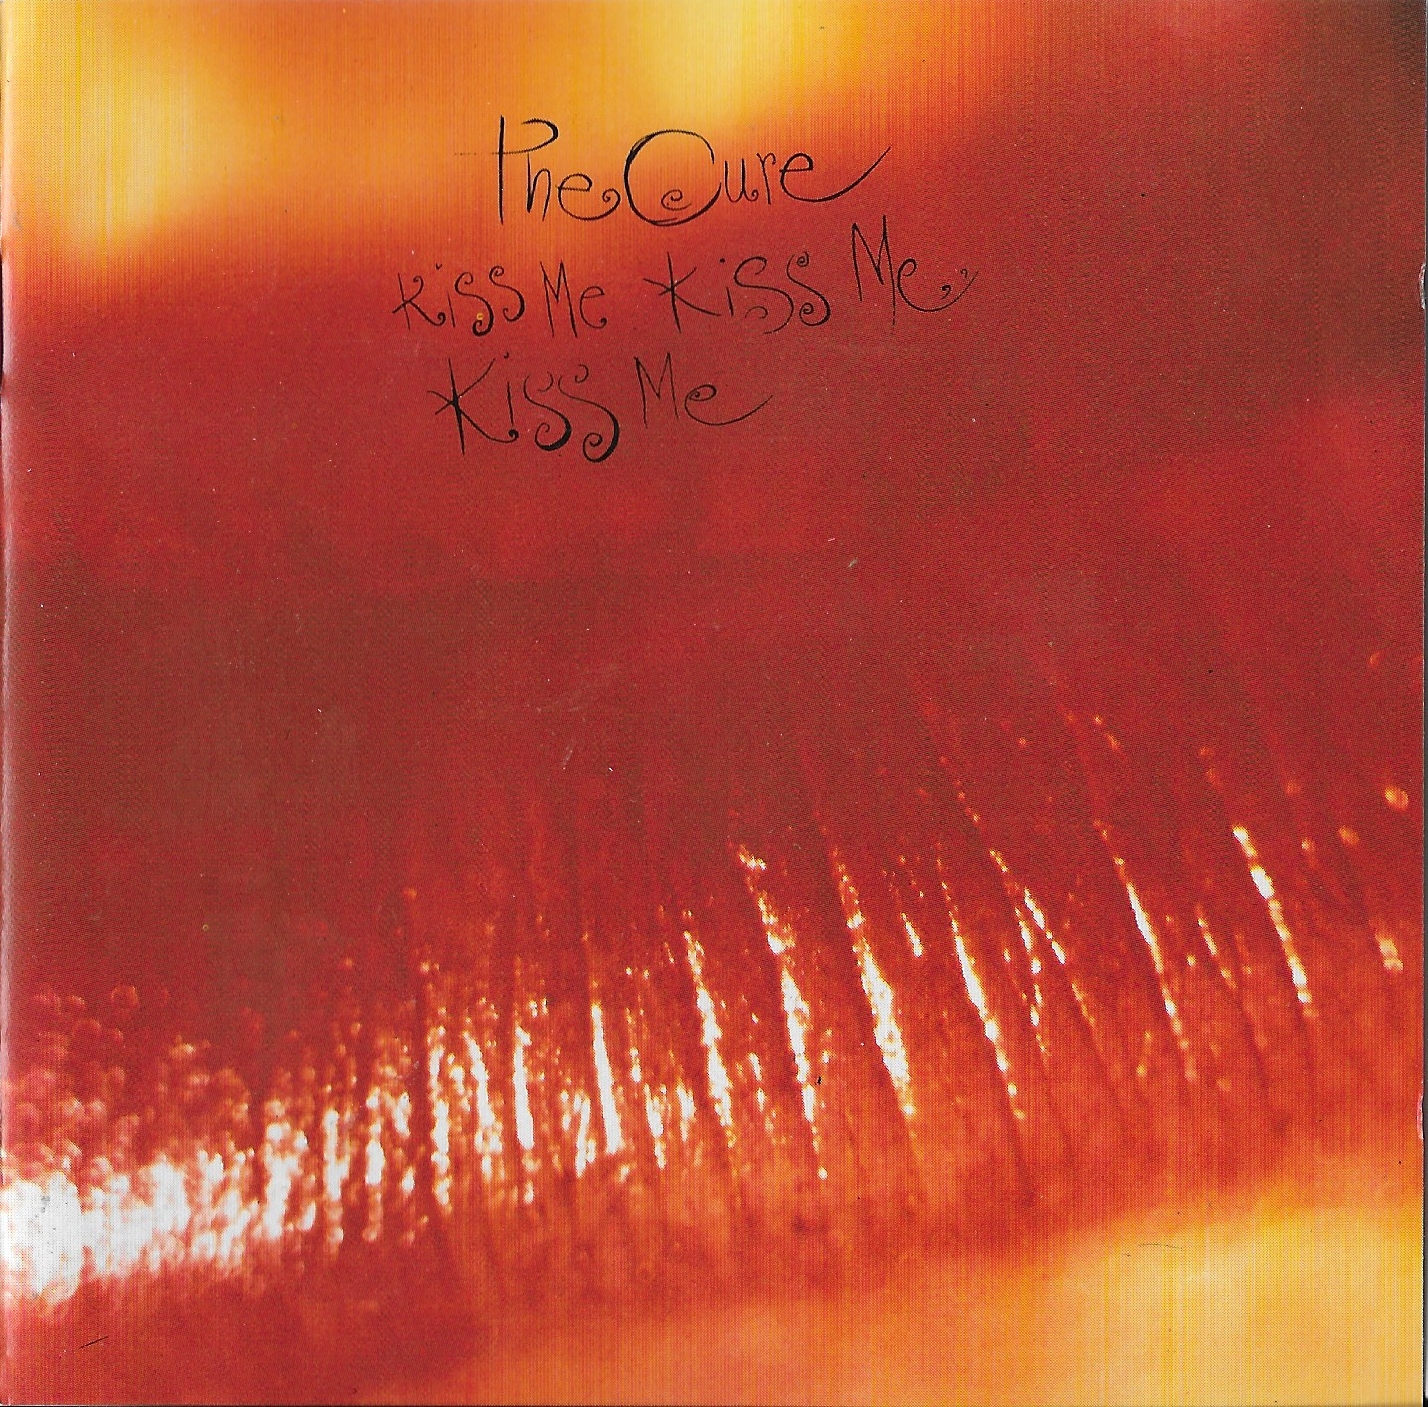 Picture of 832130 - 2 Kiss me kiss me kiss me by artist The Cure